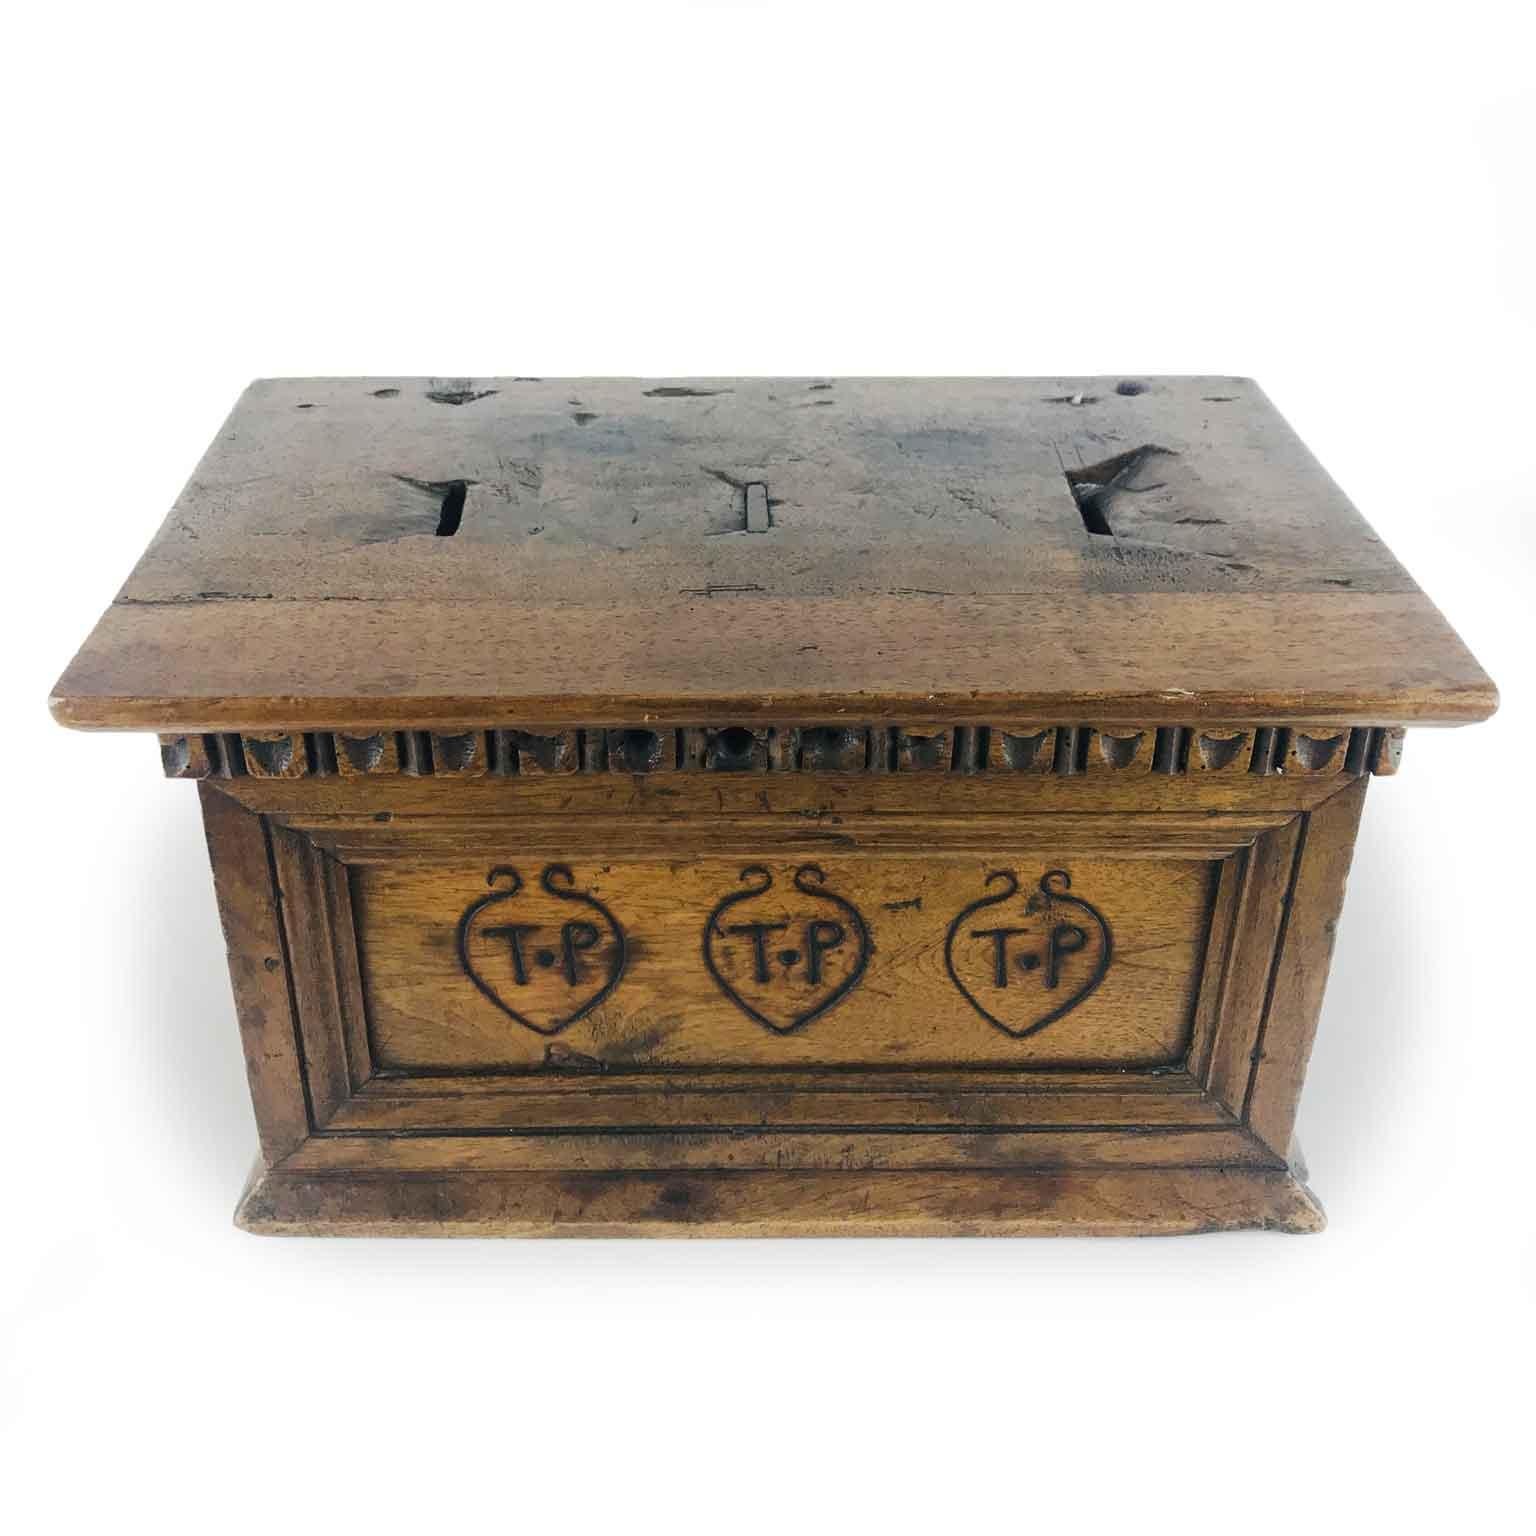 17th century rectangular shaped alms box hand-realized in solid walnut decorated with fire marked initials T.P. Of Italian origin, Northern Italy.

Good age related condition, wear consistent with use.

It is an almsgiver box for ecclesiastical